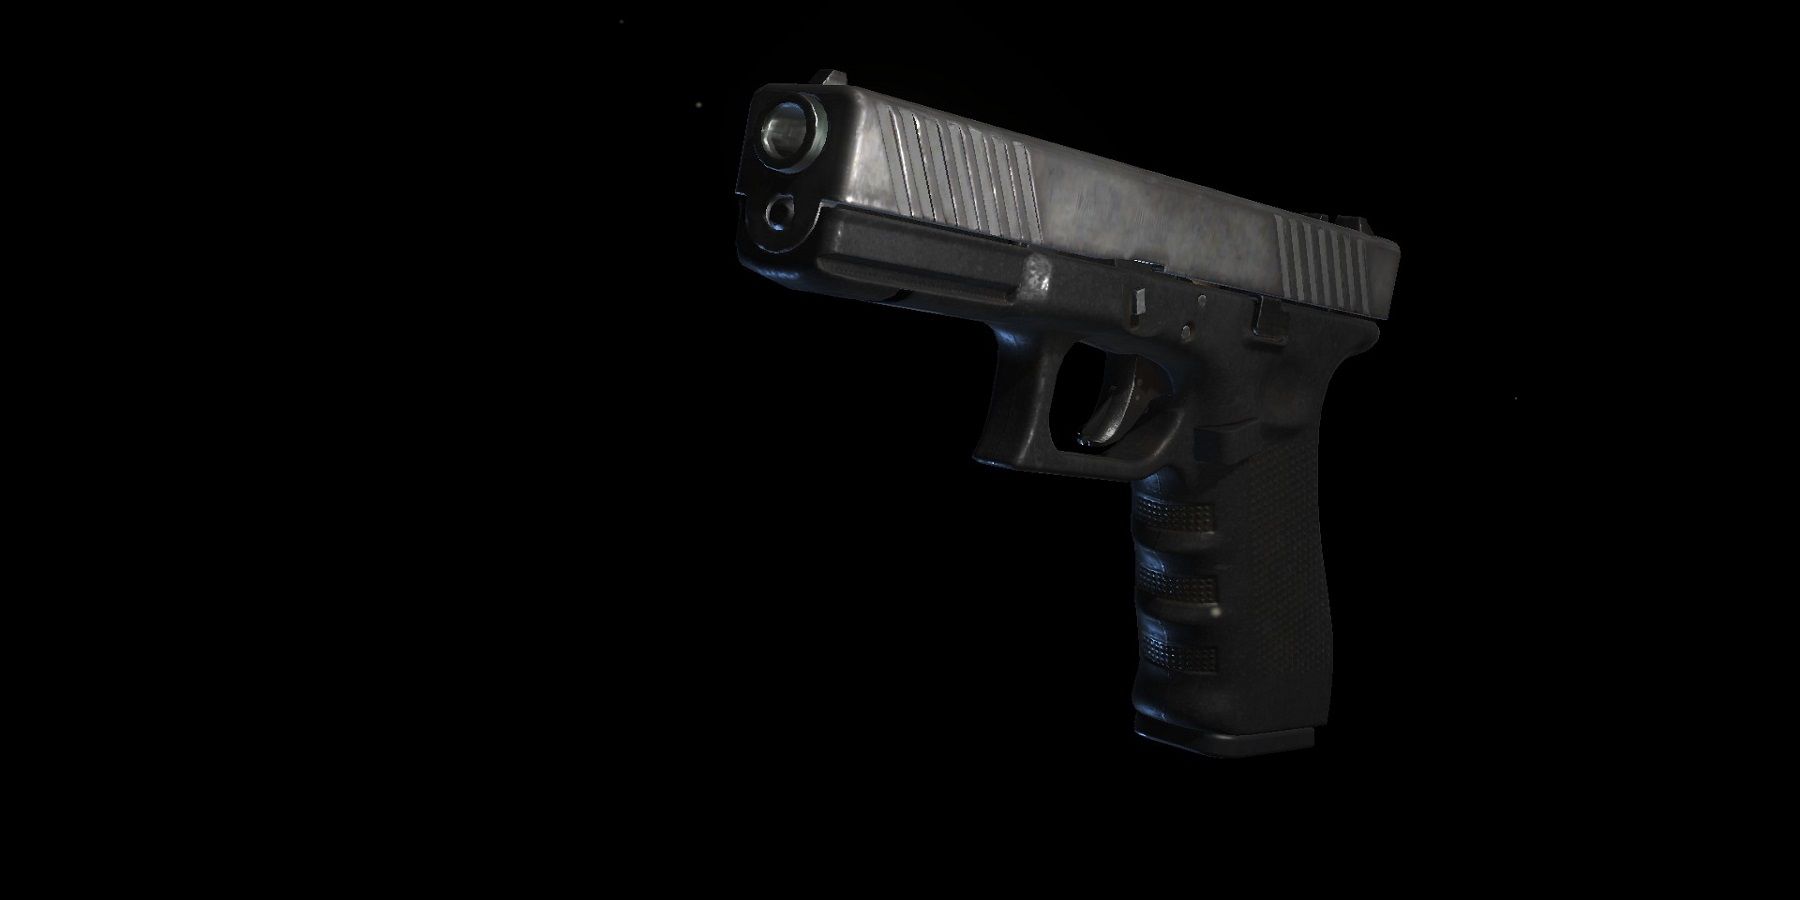 The G18 from Combat Master.